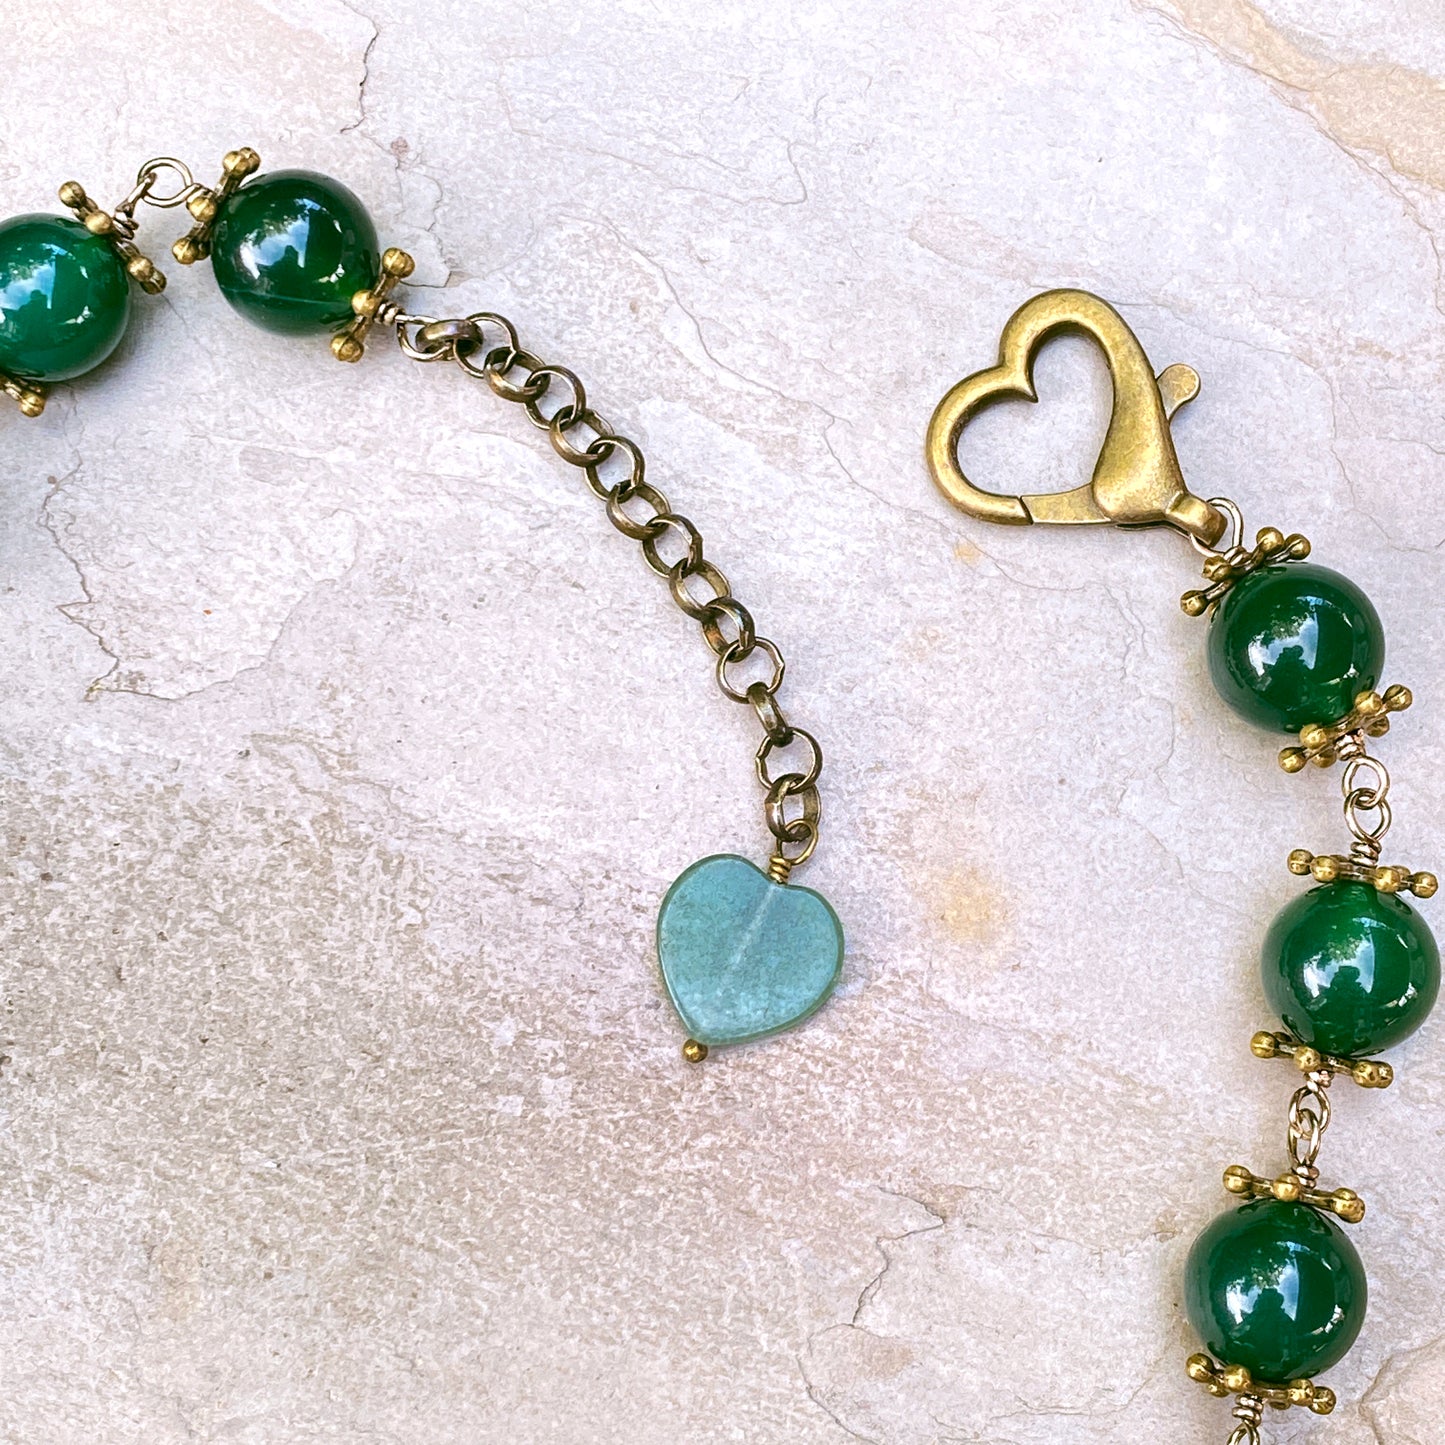 Brass and Green Agate Gemstone Necklace.